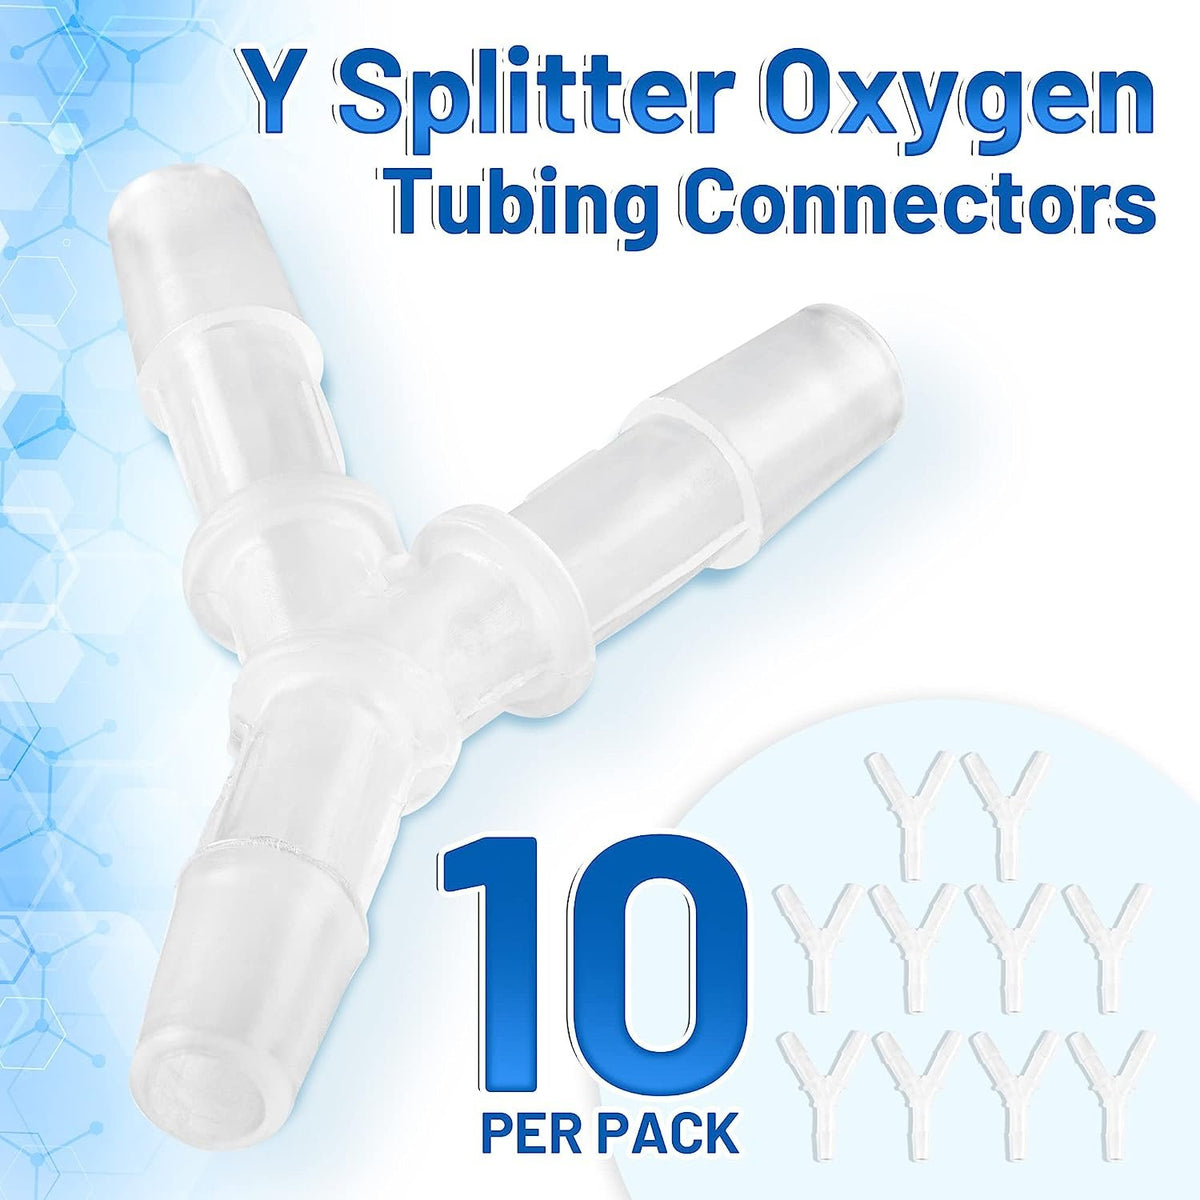 Oxygen Tubing Connectors Y Splitter - 5-Pack - Oxygen Therapy, Cannula Connector Compatible with Standard Oxygen Tubing, Ideal for Home and Medical Use